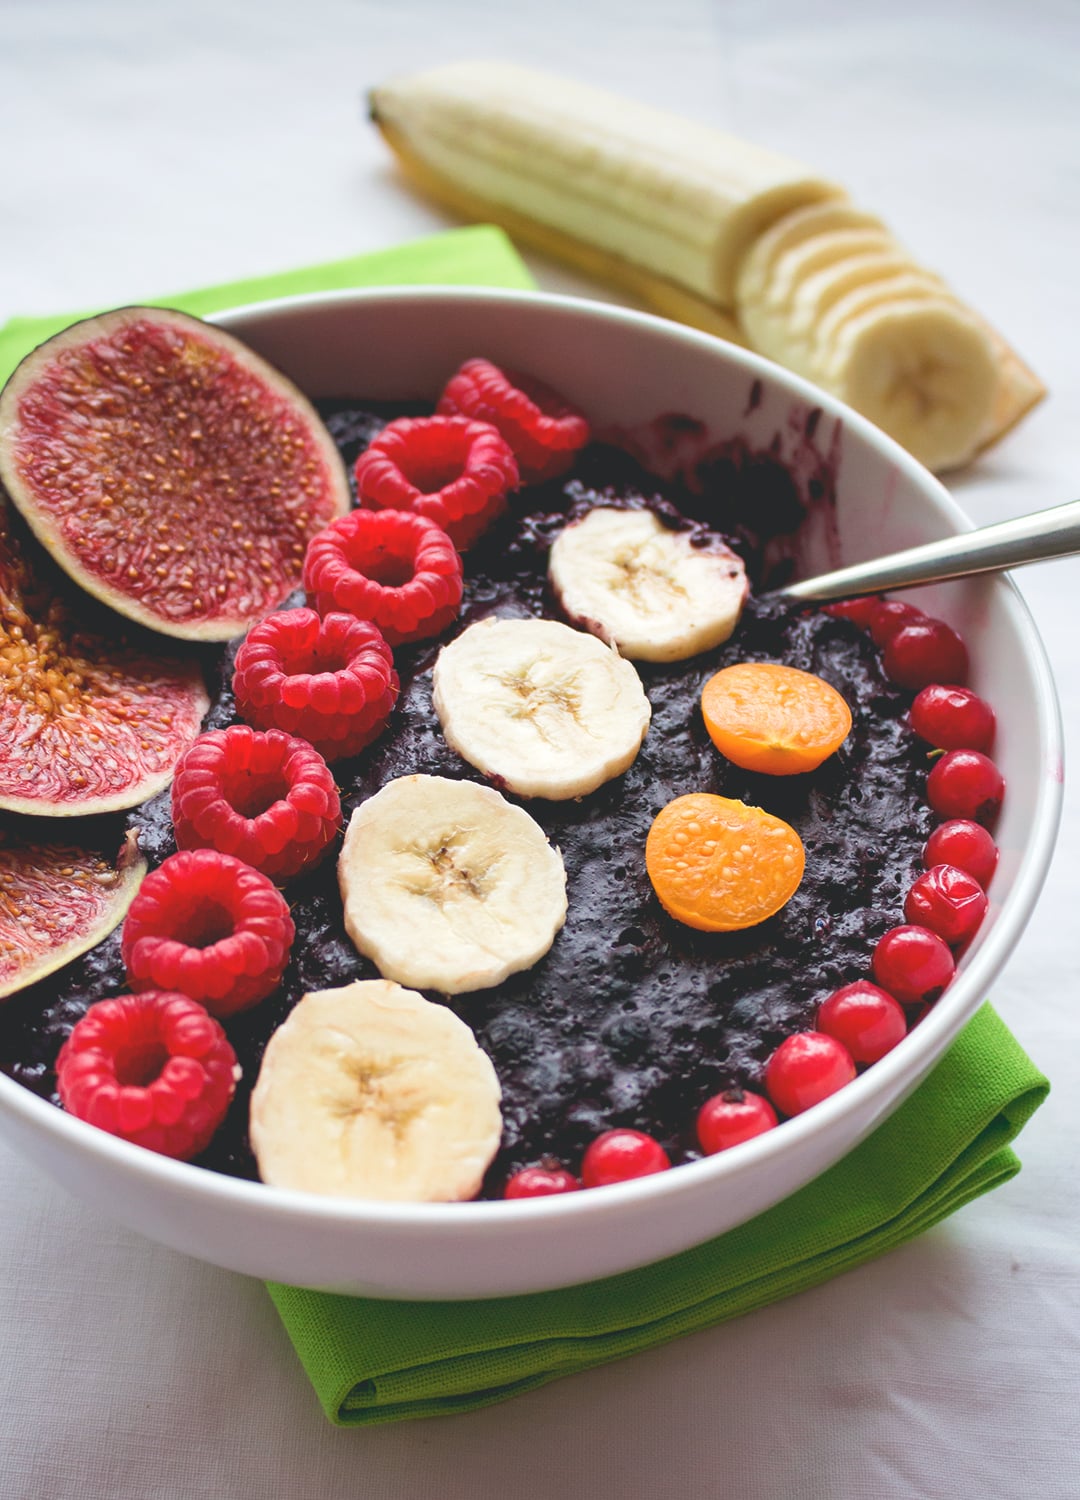 Cherry Blueberry Oatmeal with Acai - blueberries, cherries, and acai create such a delicious combination, you won't believe you aren't eating a dessert! Vegan and gluten free recipe. | thehealthfulideas.com